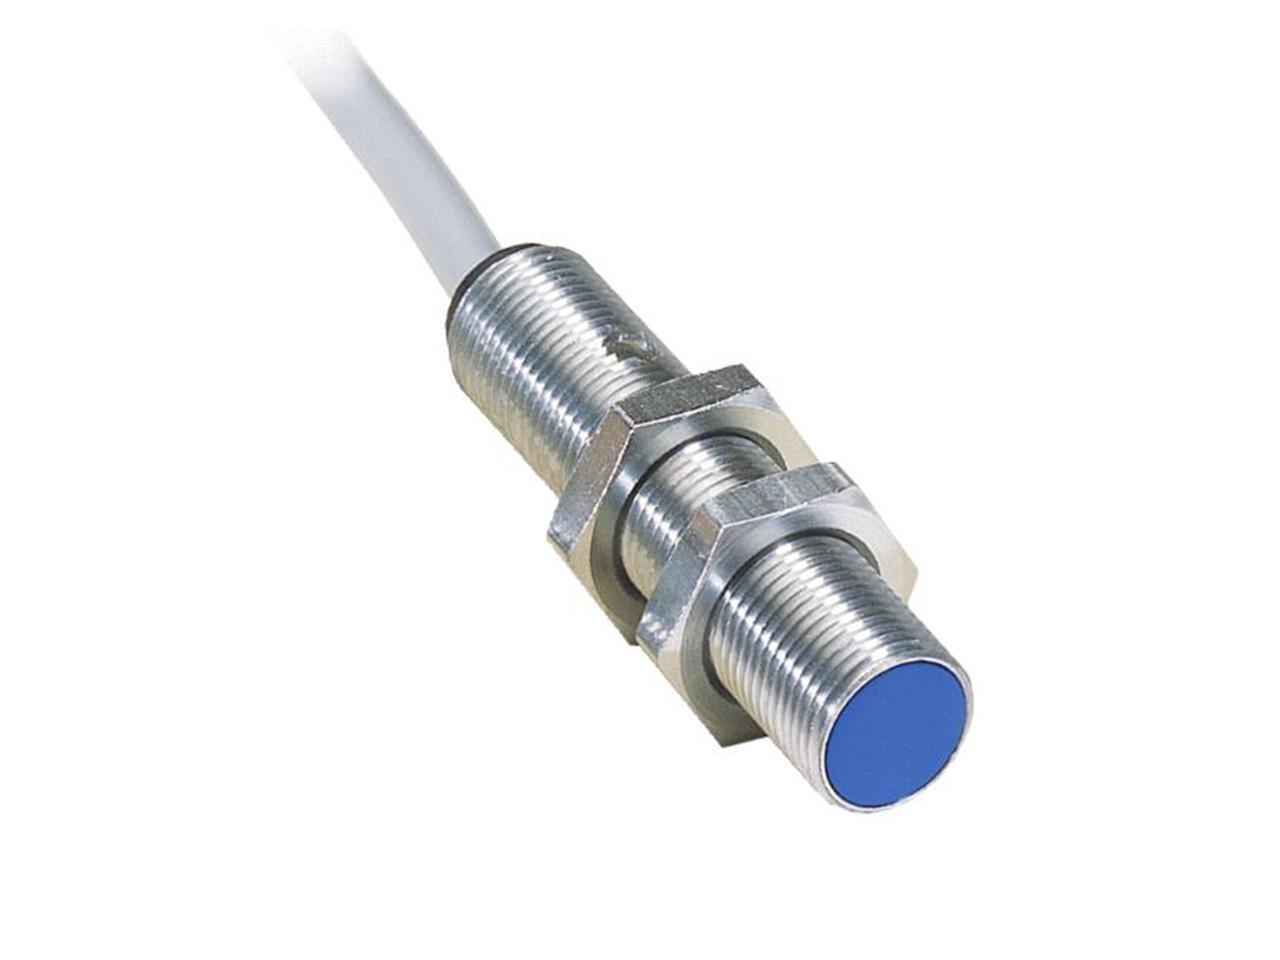 1pc SICK Proximity Sensor Wtb140-p330 Fast Delivery for sale online 